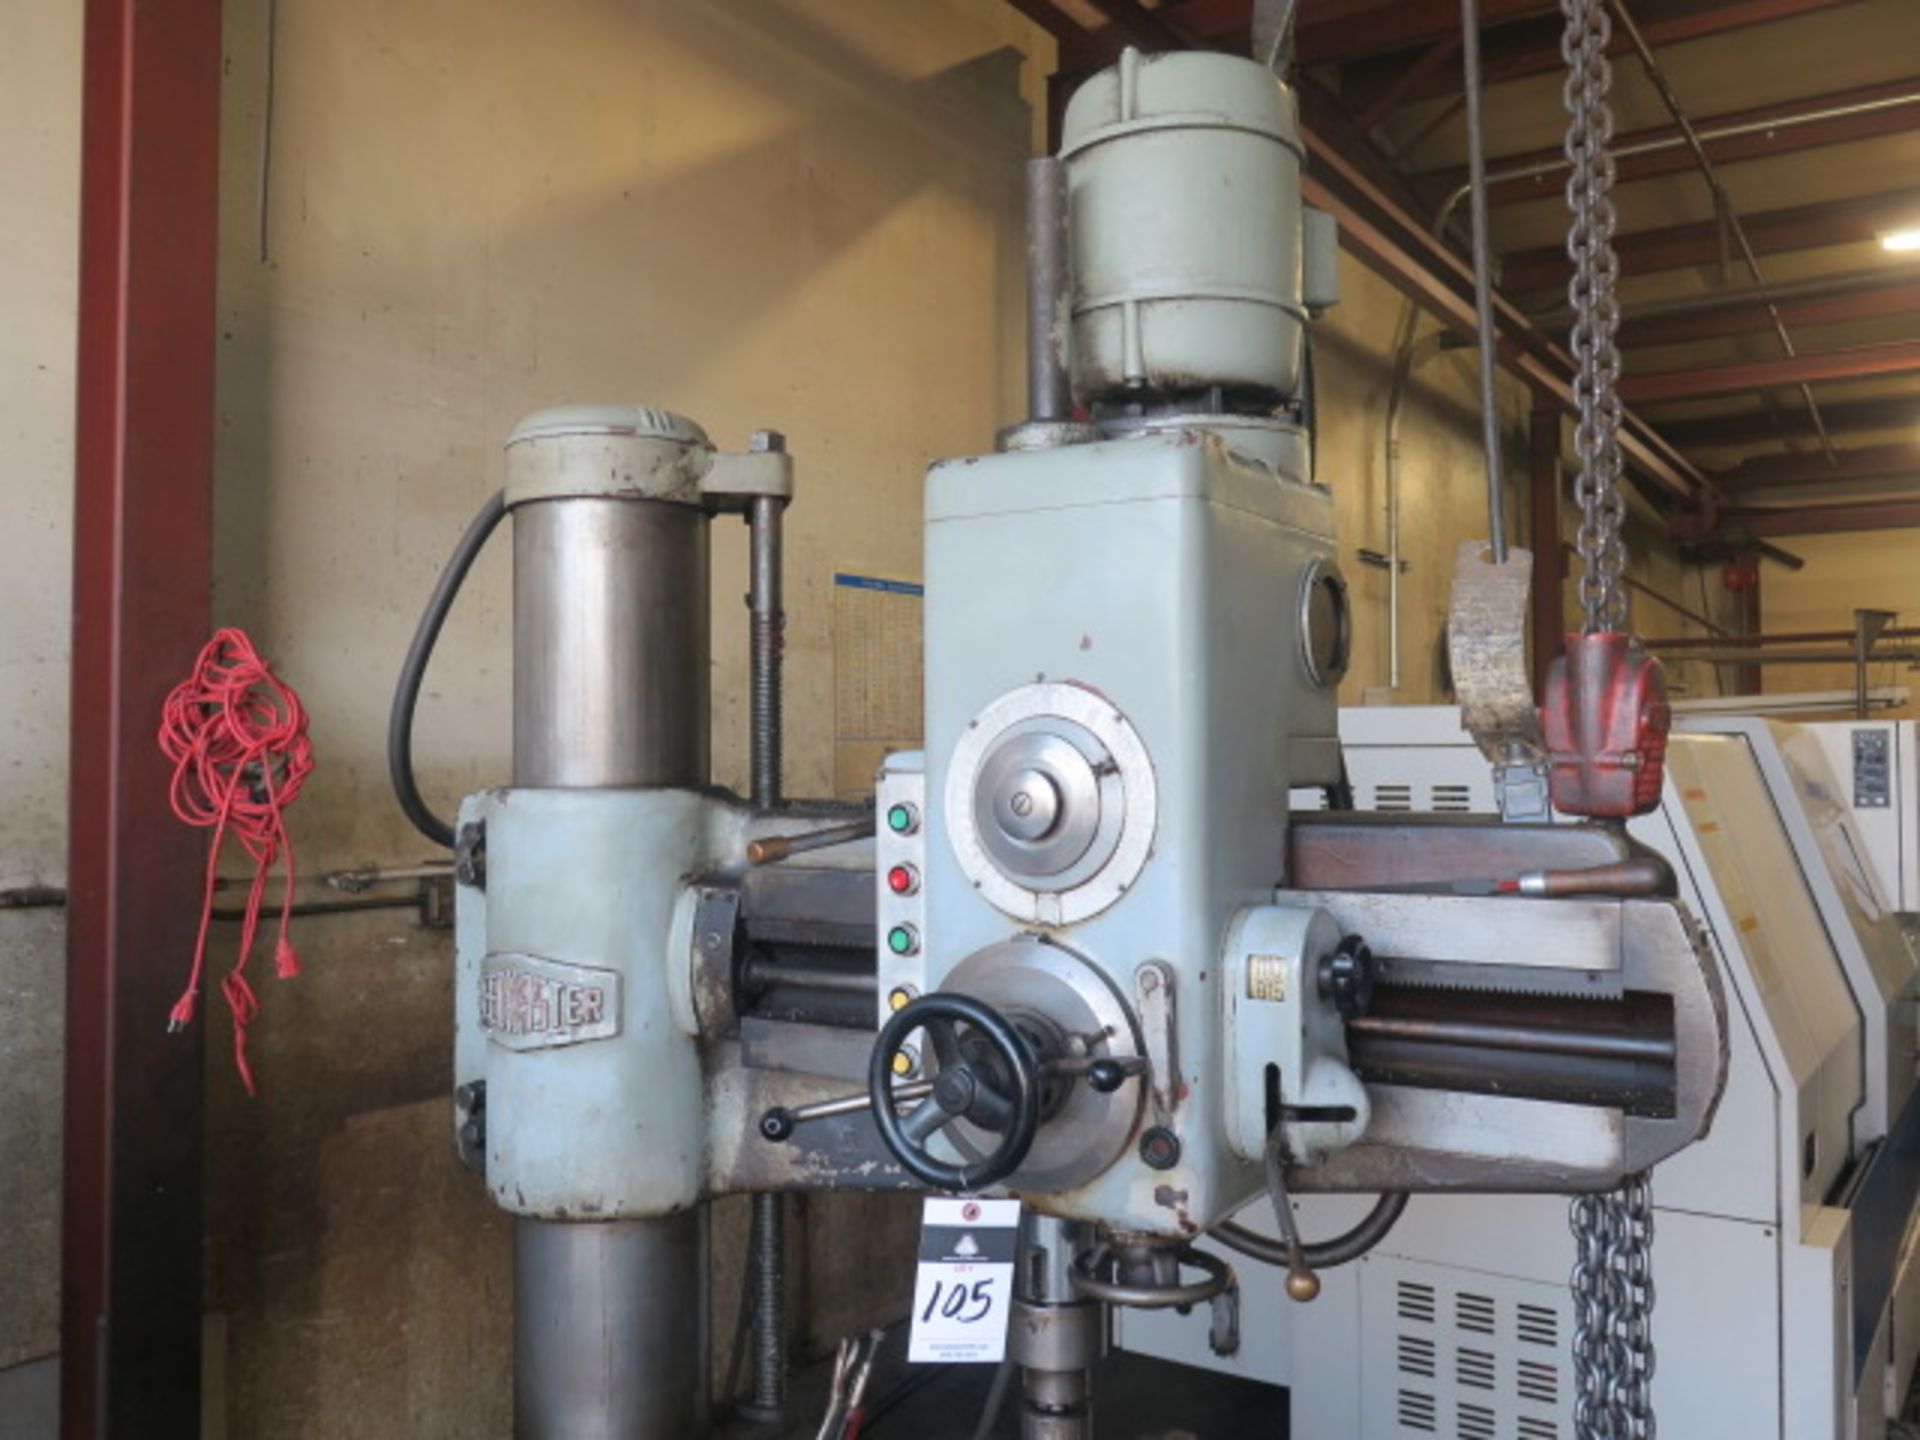 Speedmaster 9" Column x 24" Radial Arm Drill s/n 196688 w/ 60-2100 RPM, Power Column and Feeds, 16 - Image 3 of 7